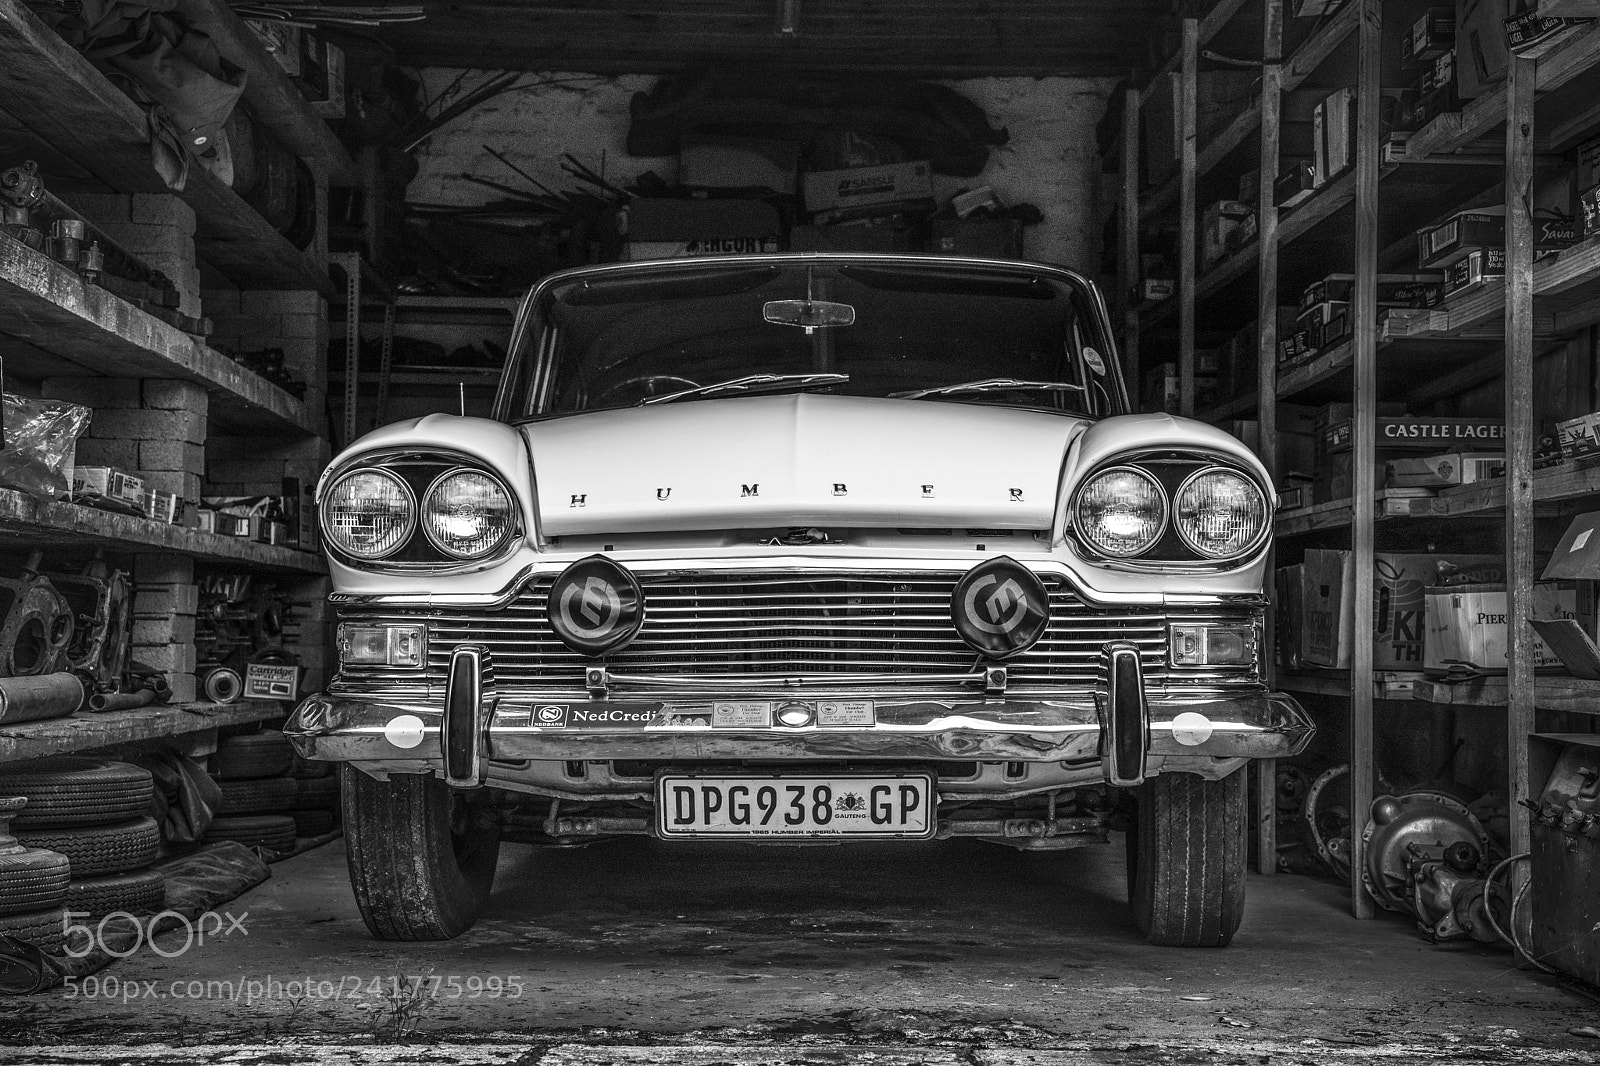 Canon EOS 5D Mark IV sample photo. 60s humber super snipe photography